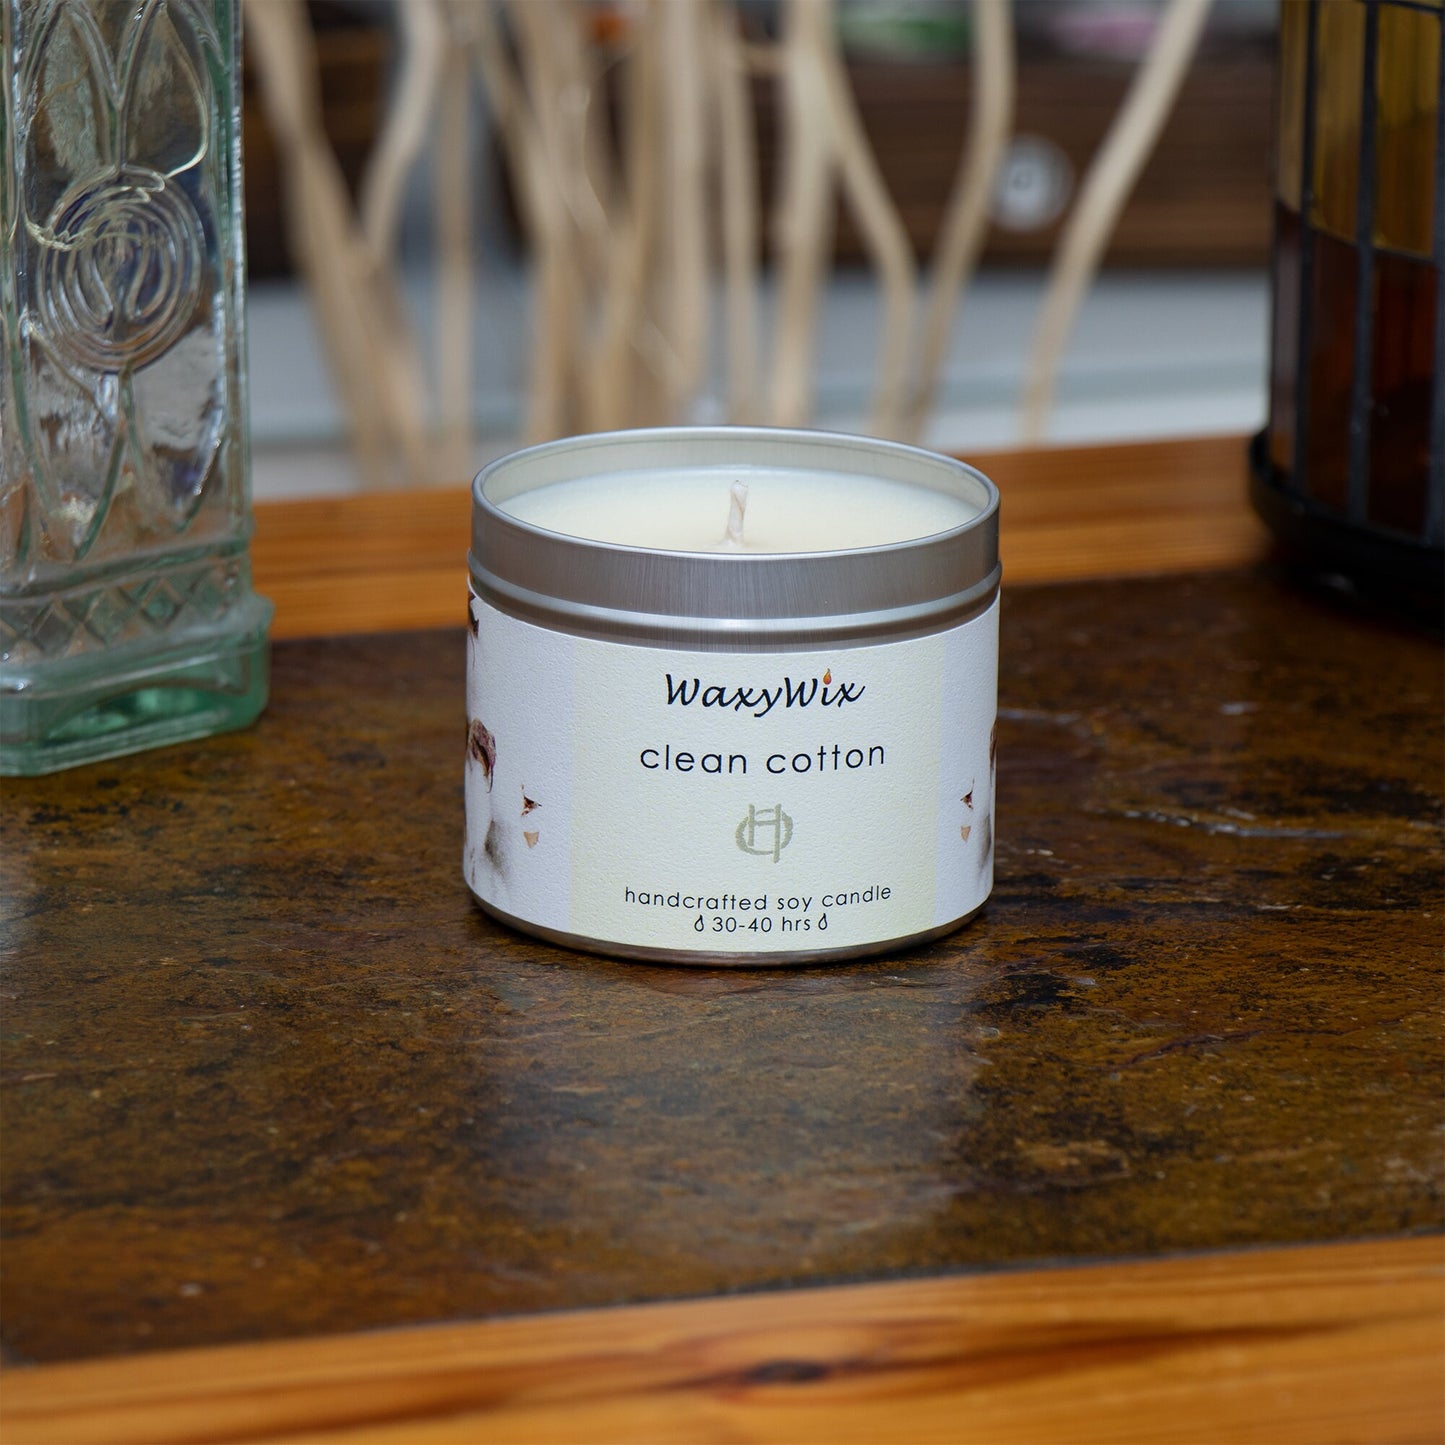 Clean cotton Handmade soy wax candle